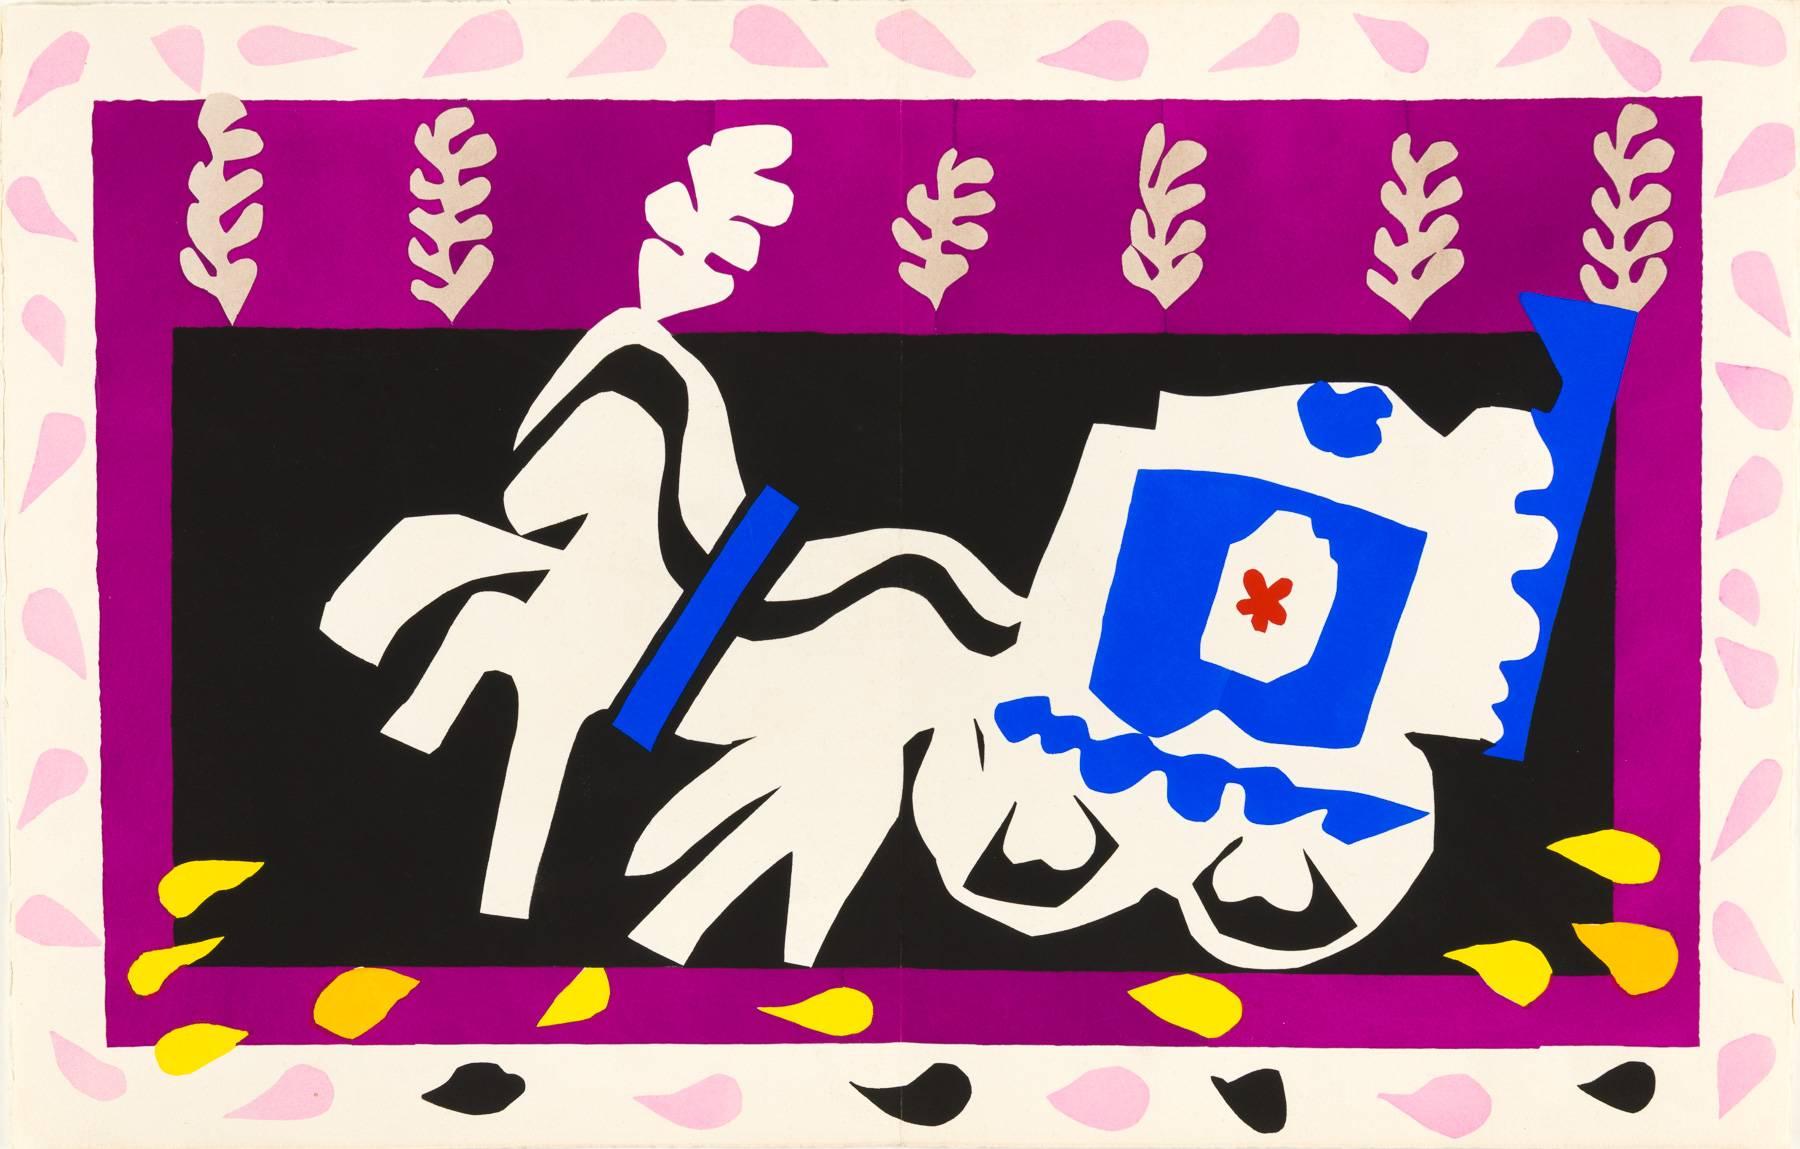 Henri Matisse Abstract Print - The Burial of Pierrot